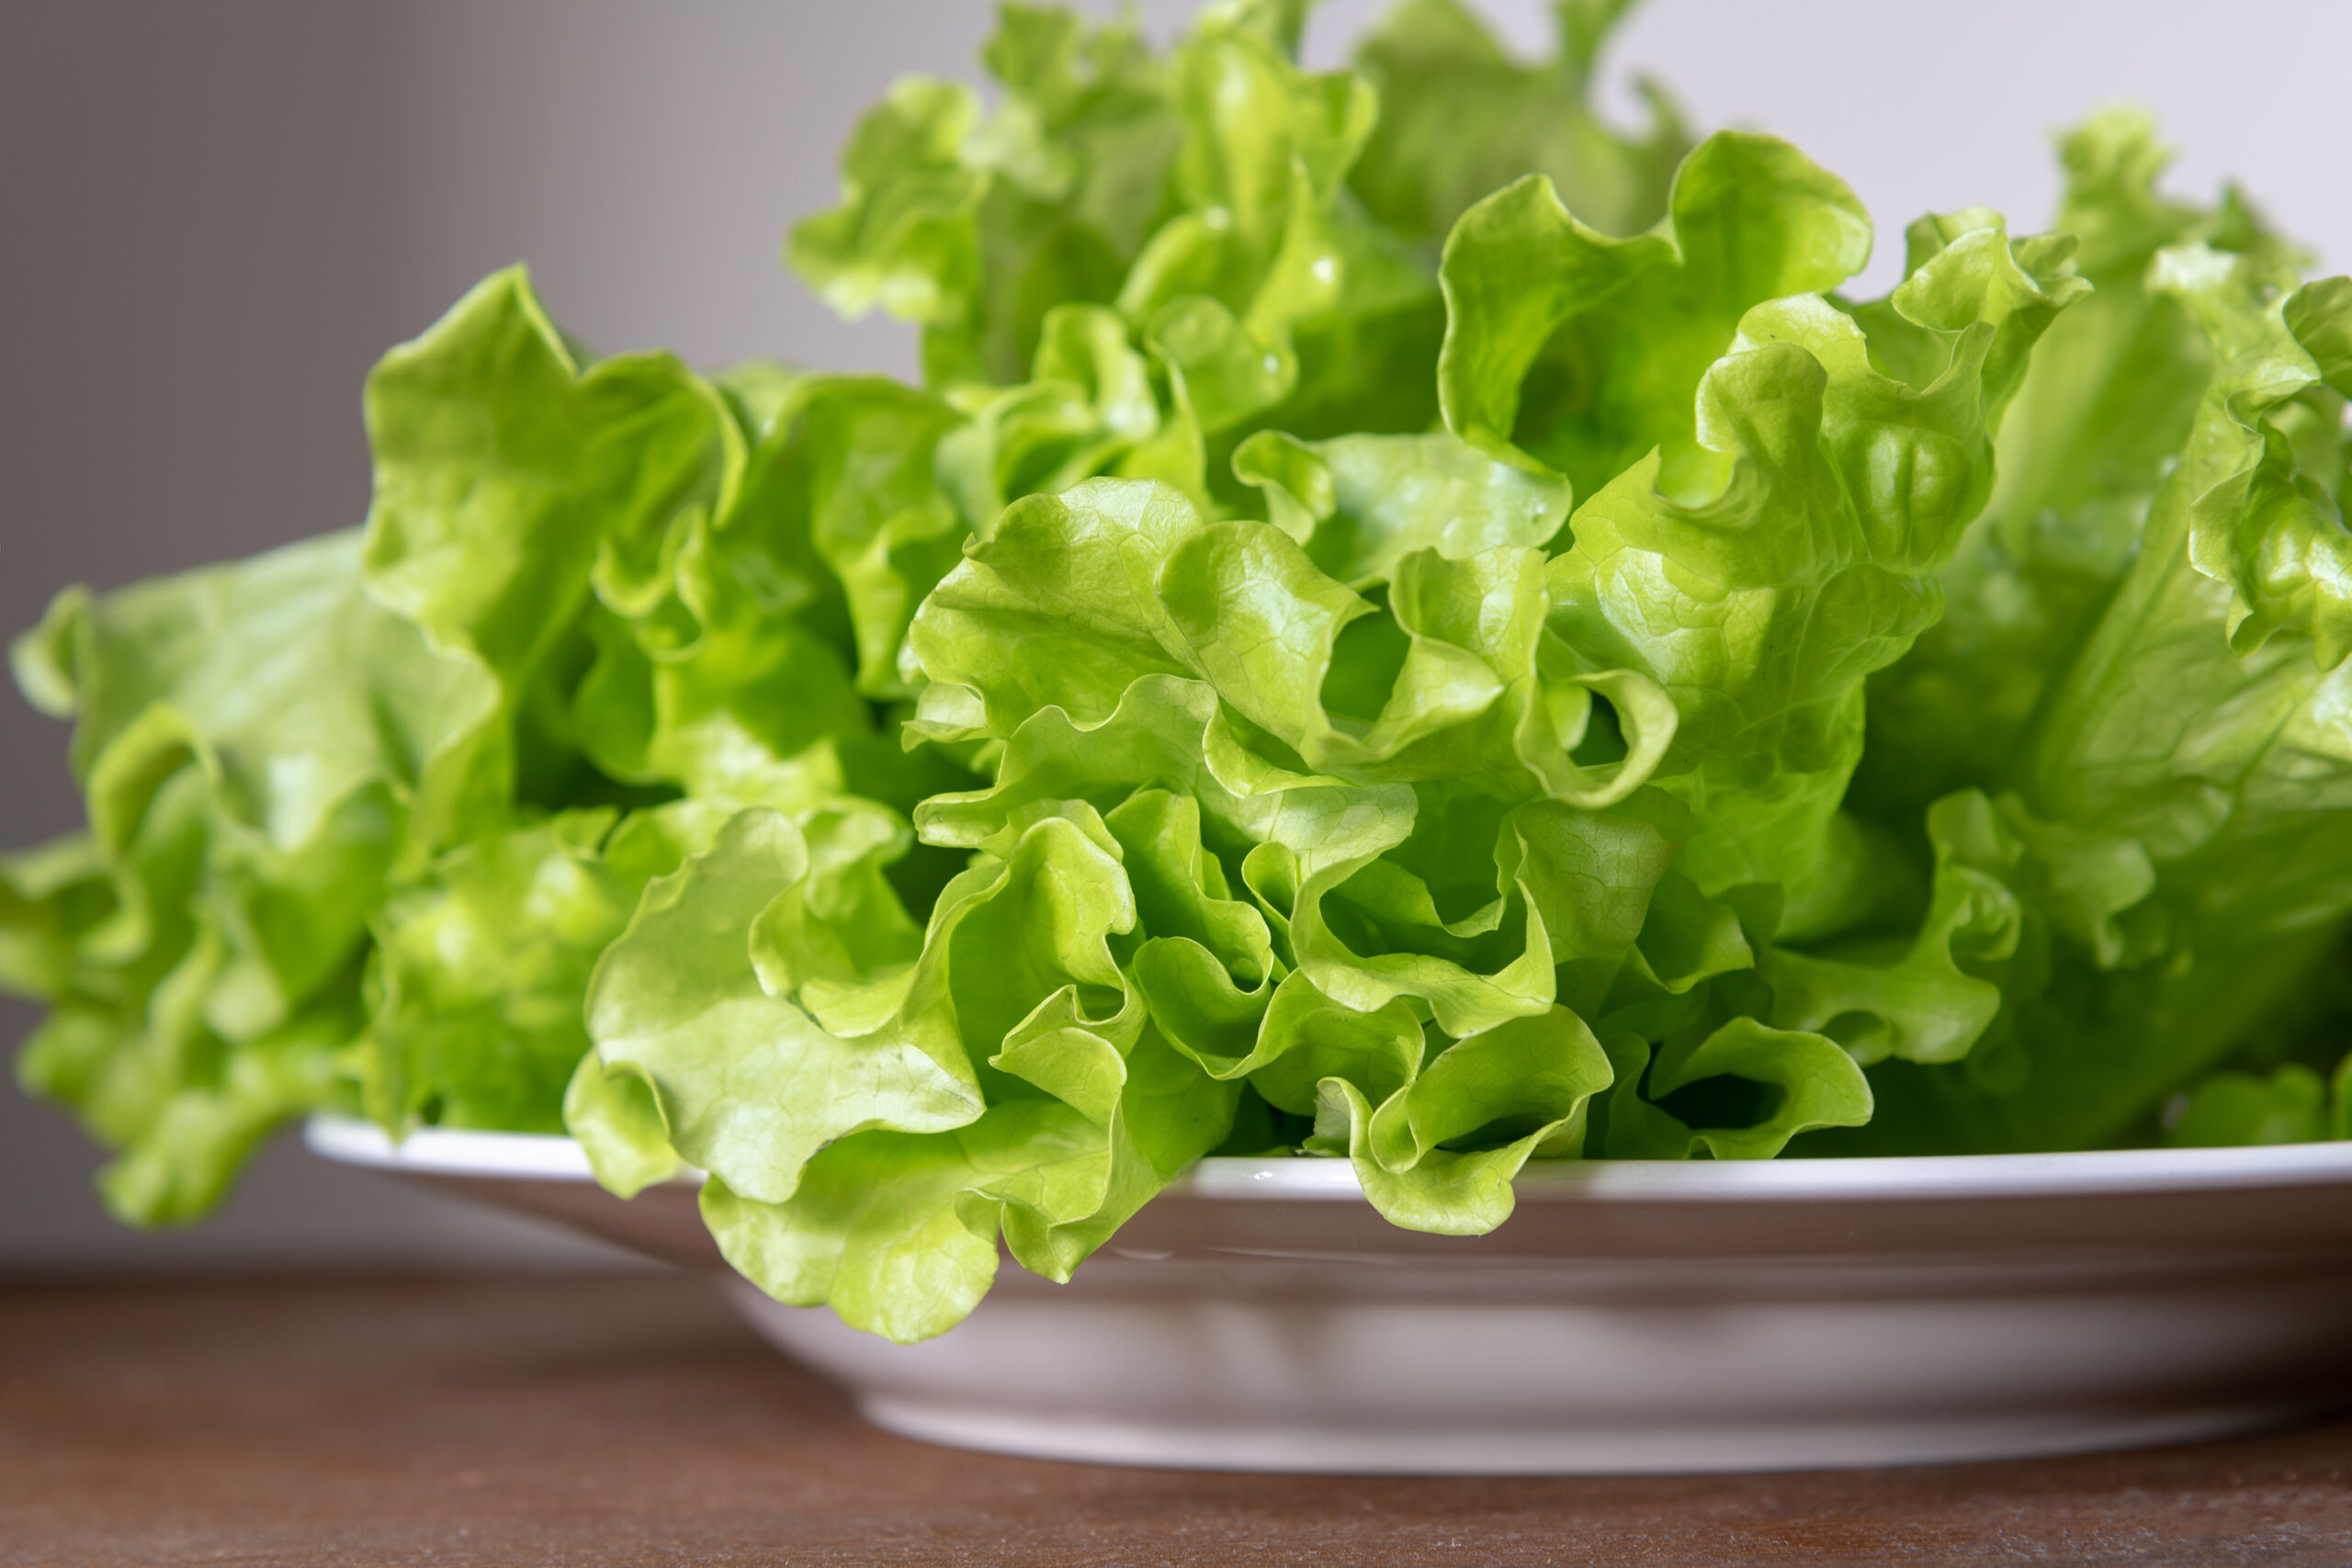 green and fresh lettuce salad on plate.